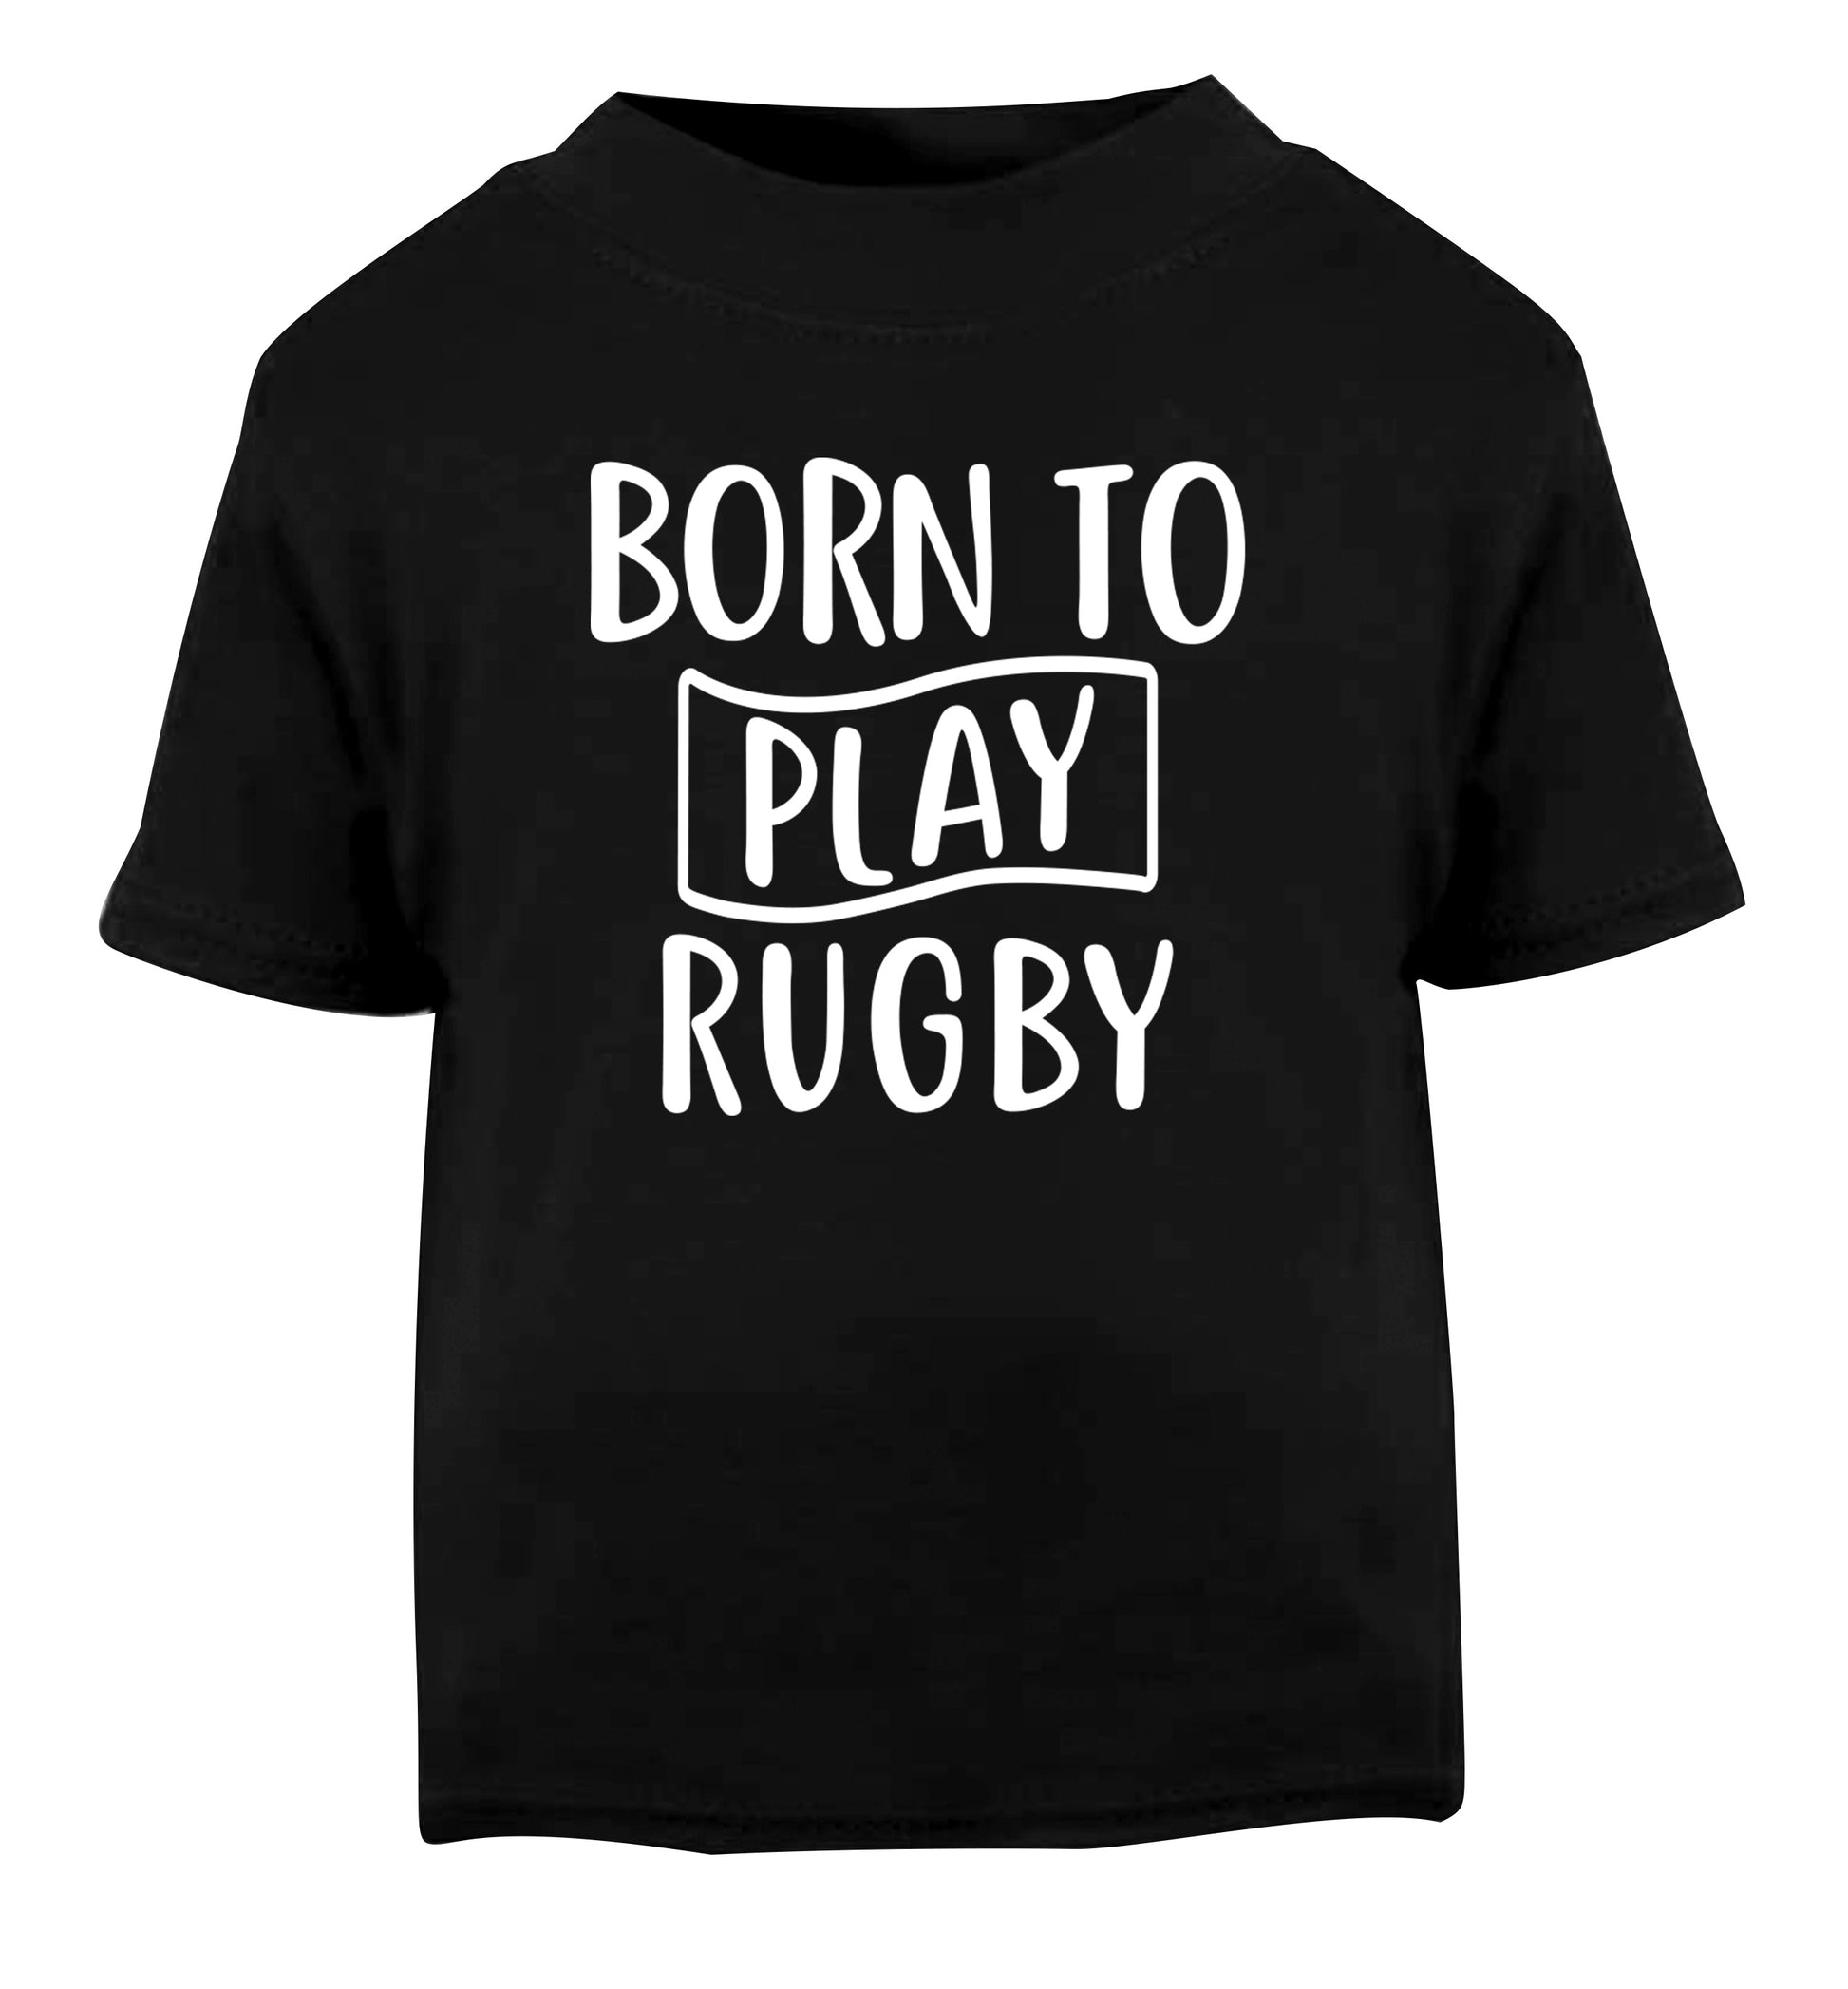 Born to play rugby Black Baby Toddler Tshirt 2 years